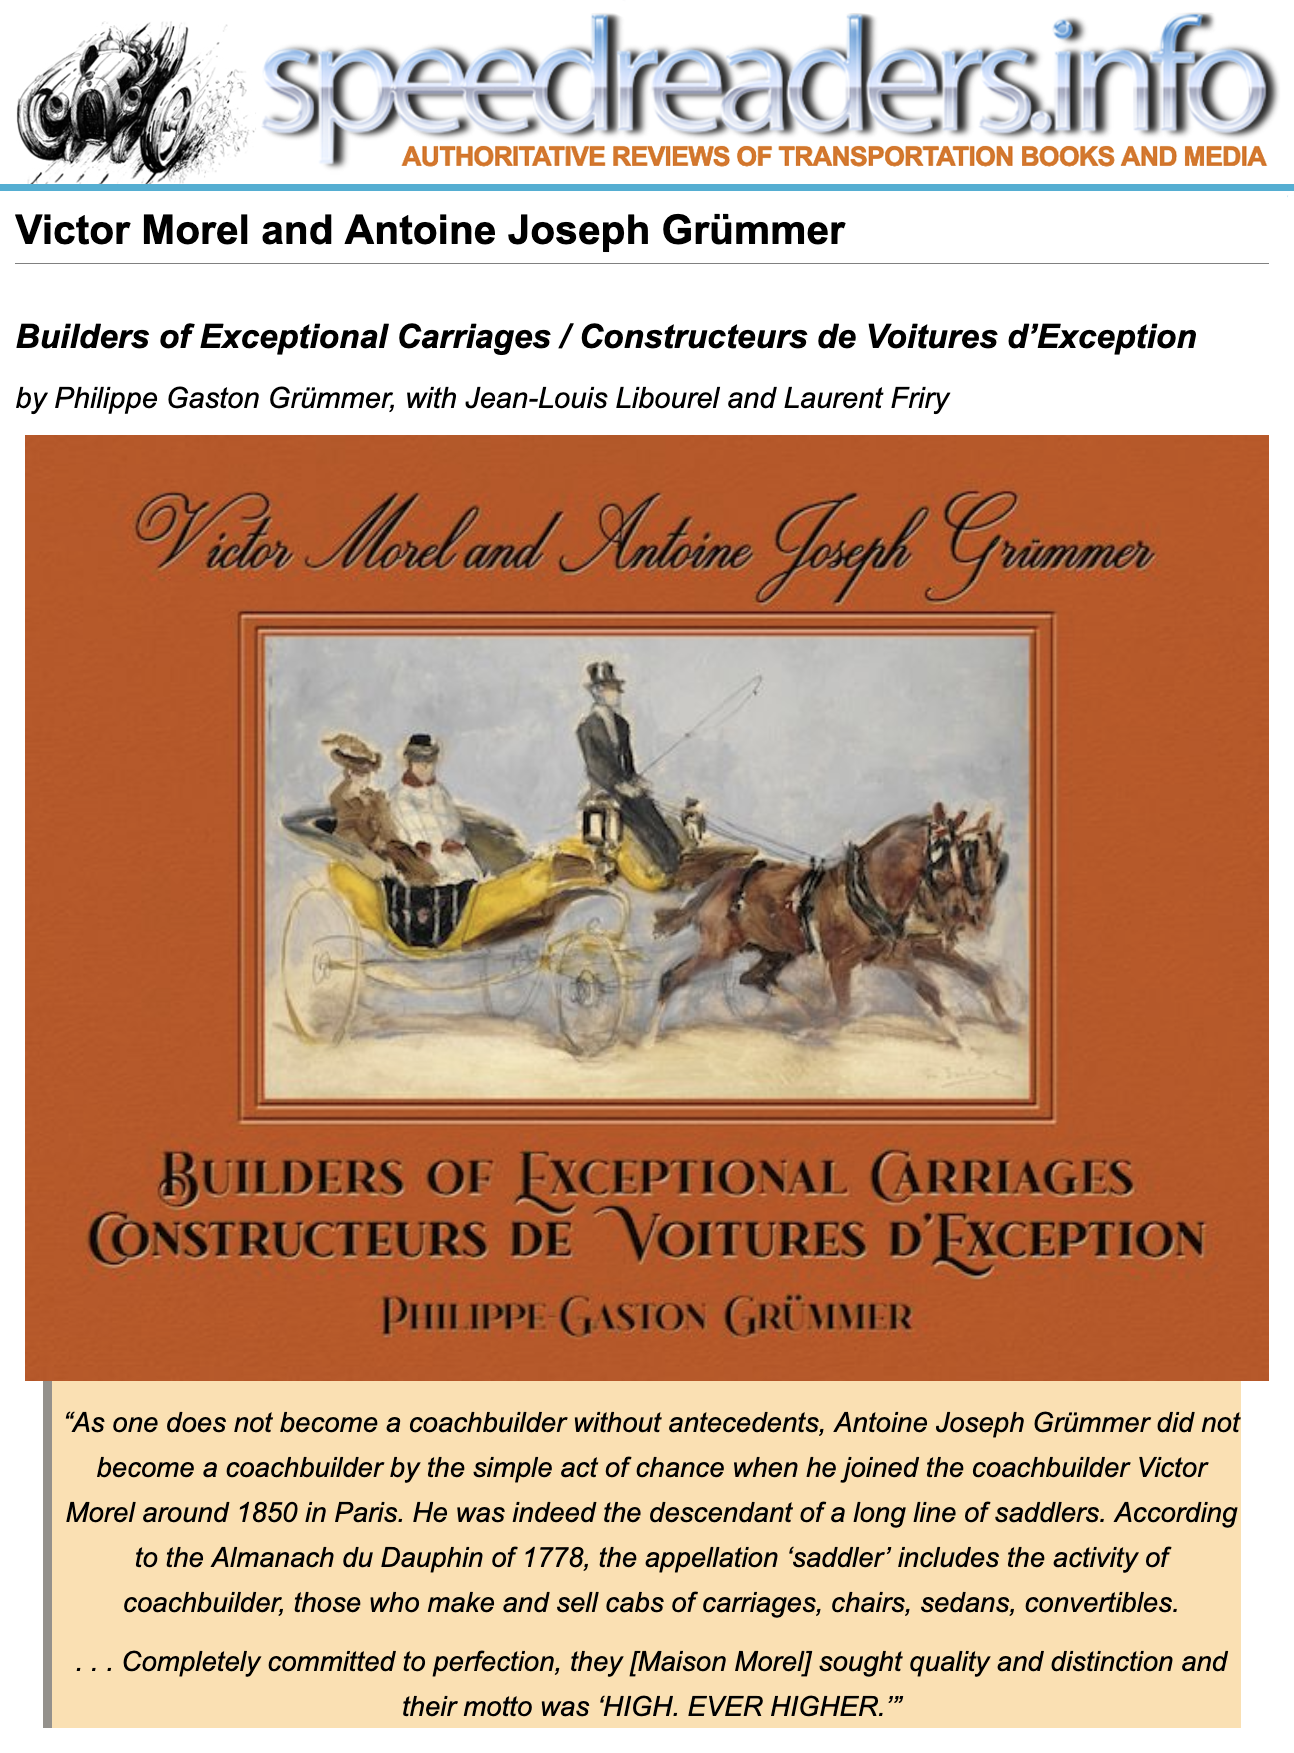 Victor Morel and Antoine Joseph Grummer: Builders of Exceptinal Carriages